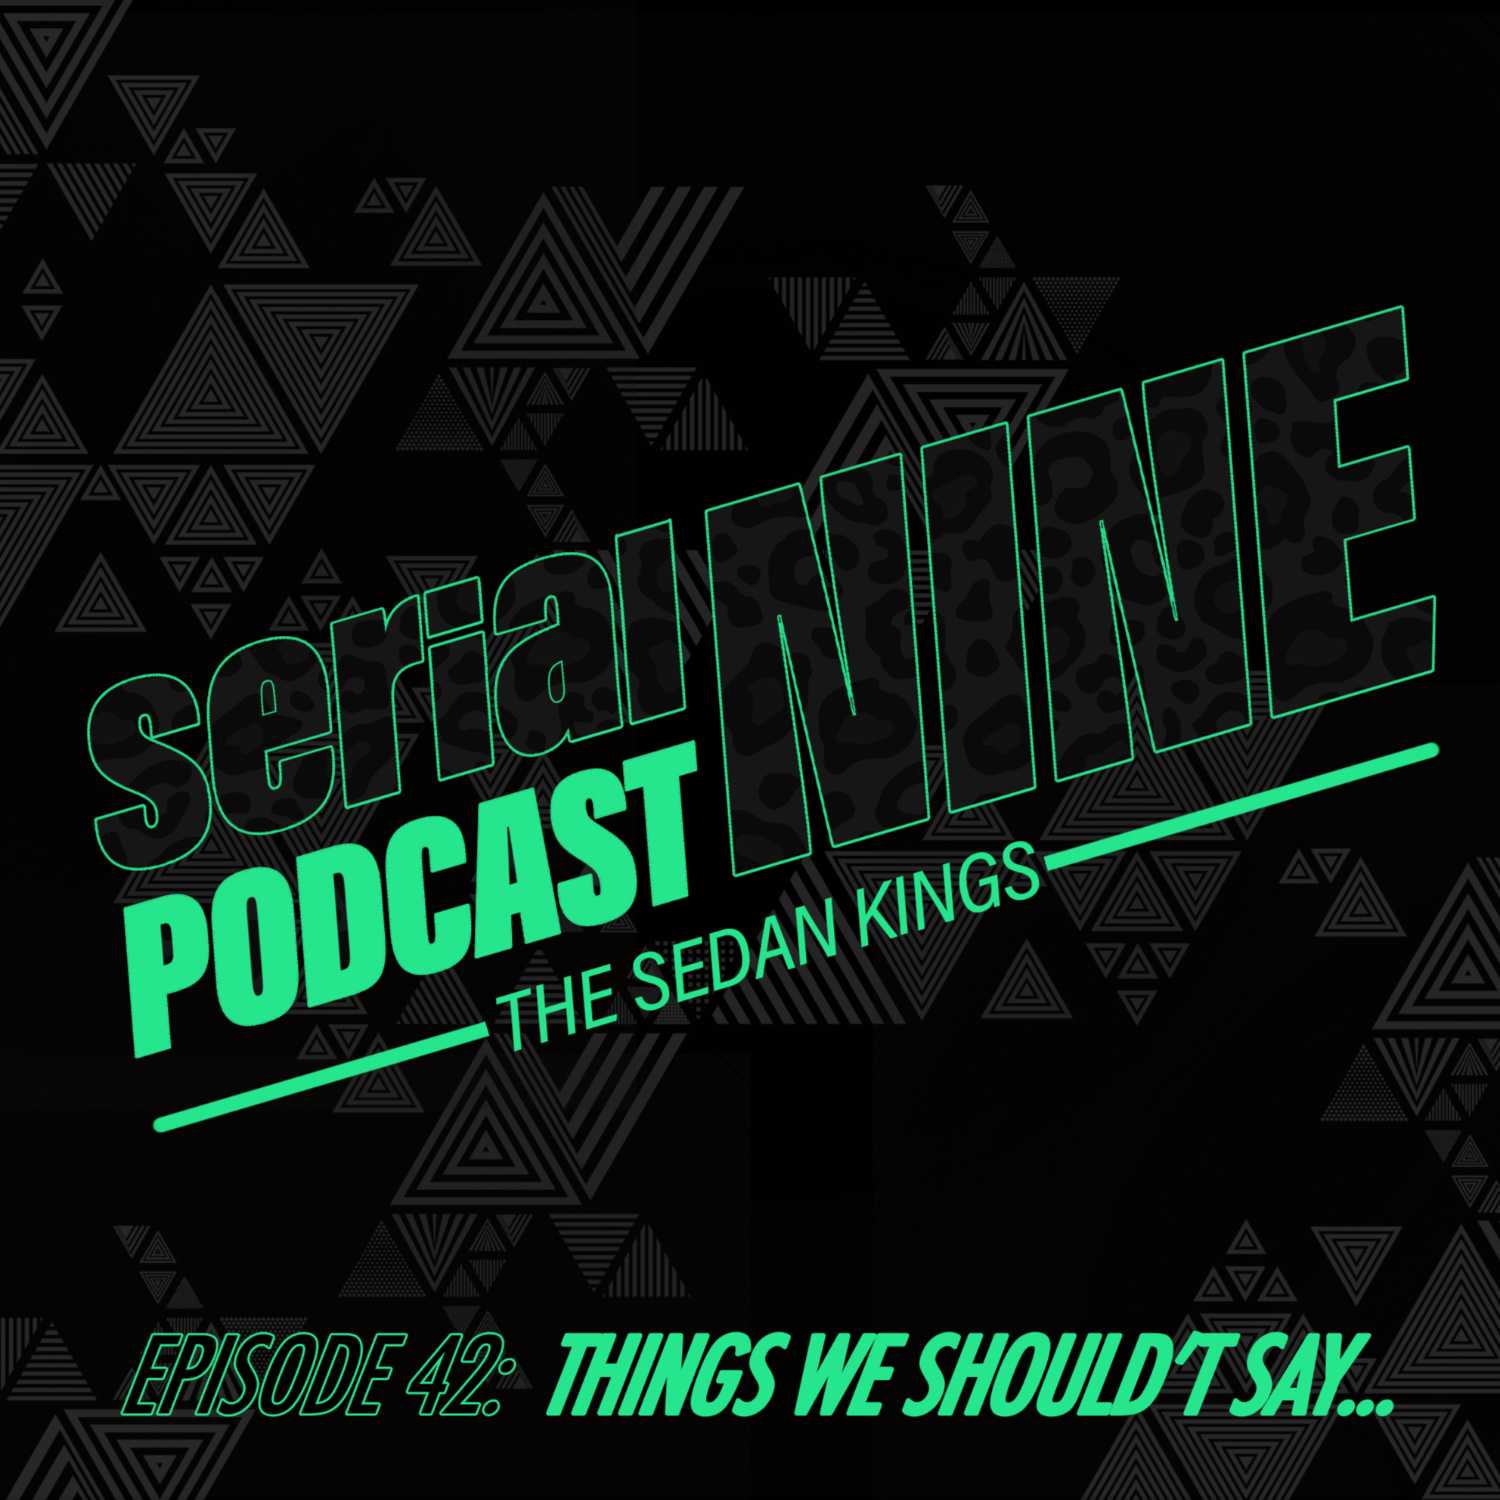 SerialPodcastNine Episode 42 Things We Shouldn't Say